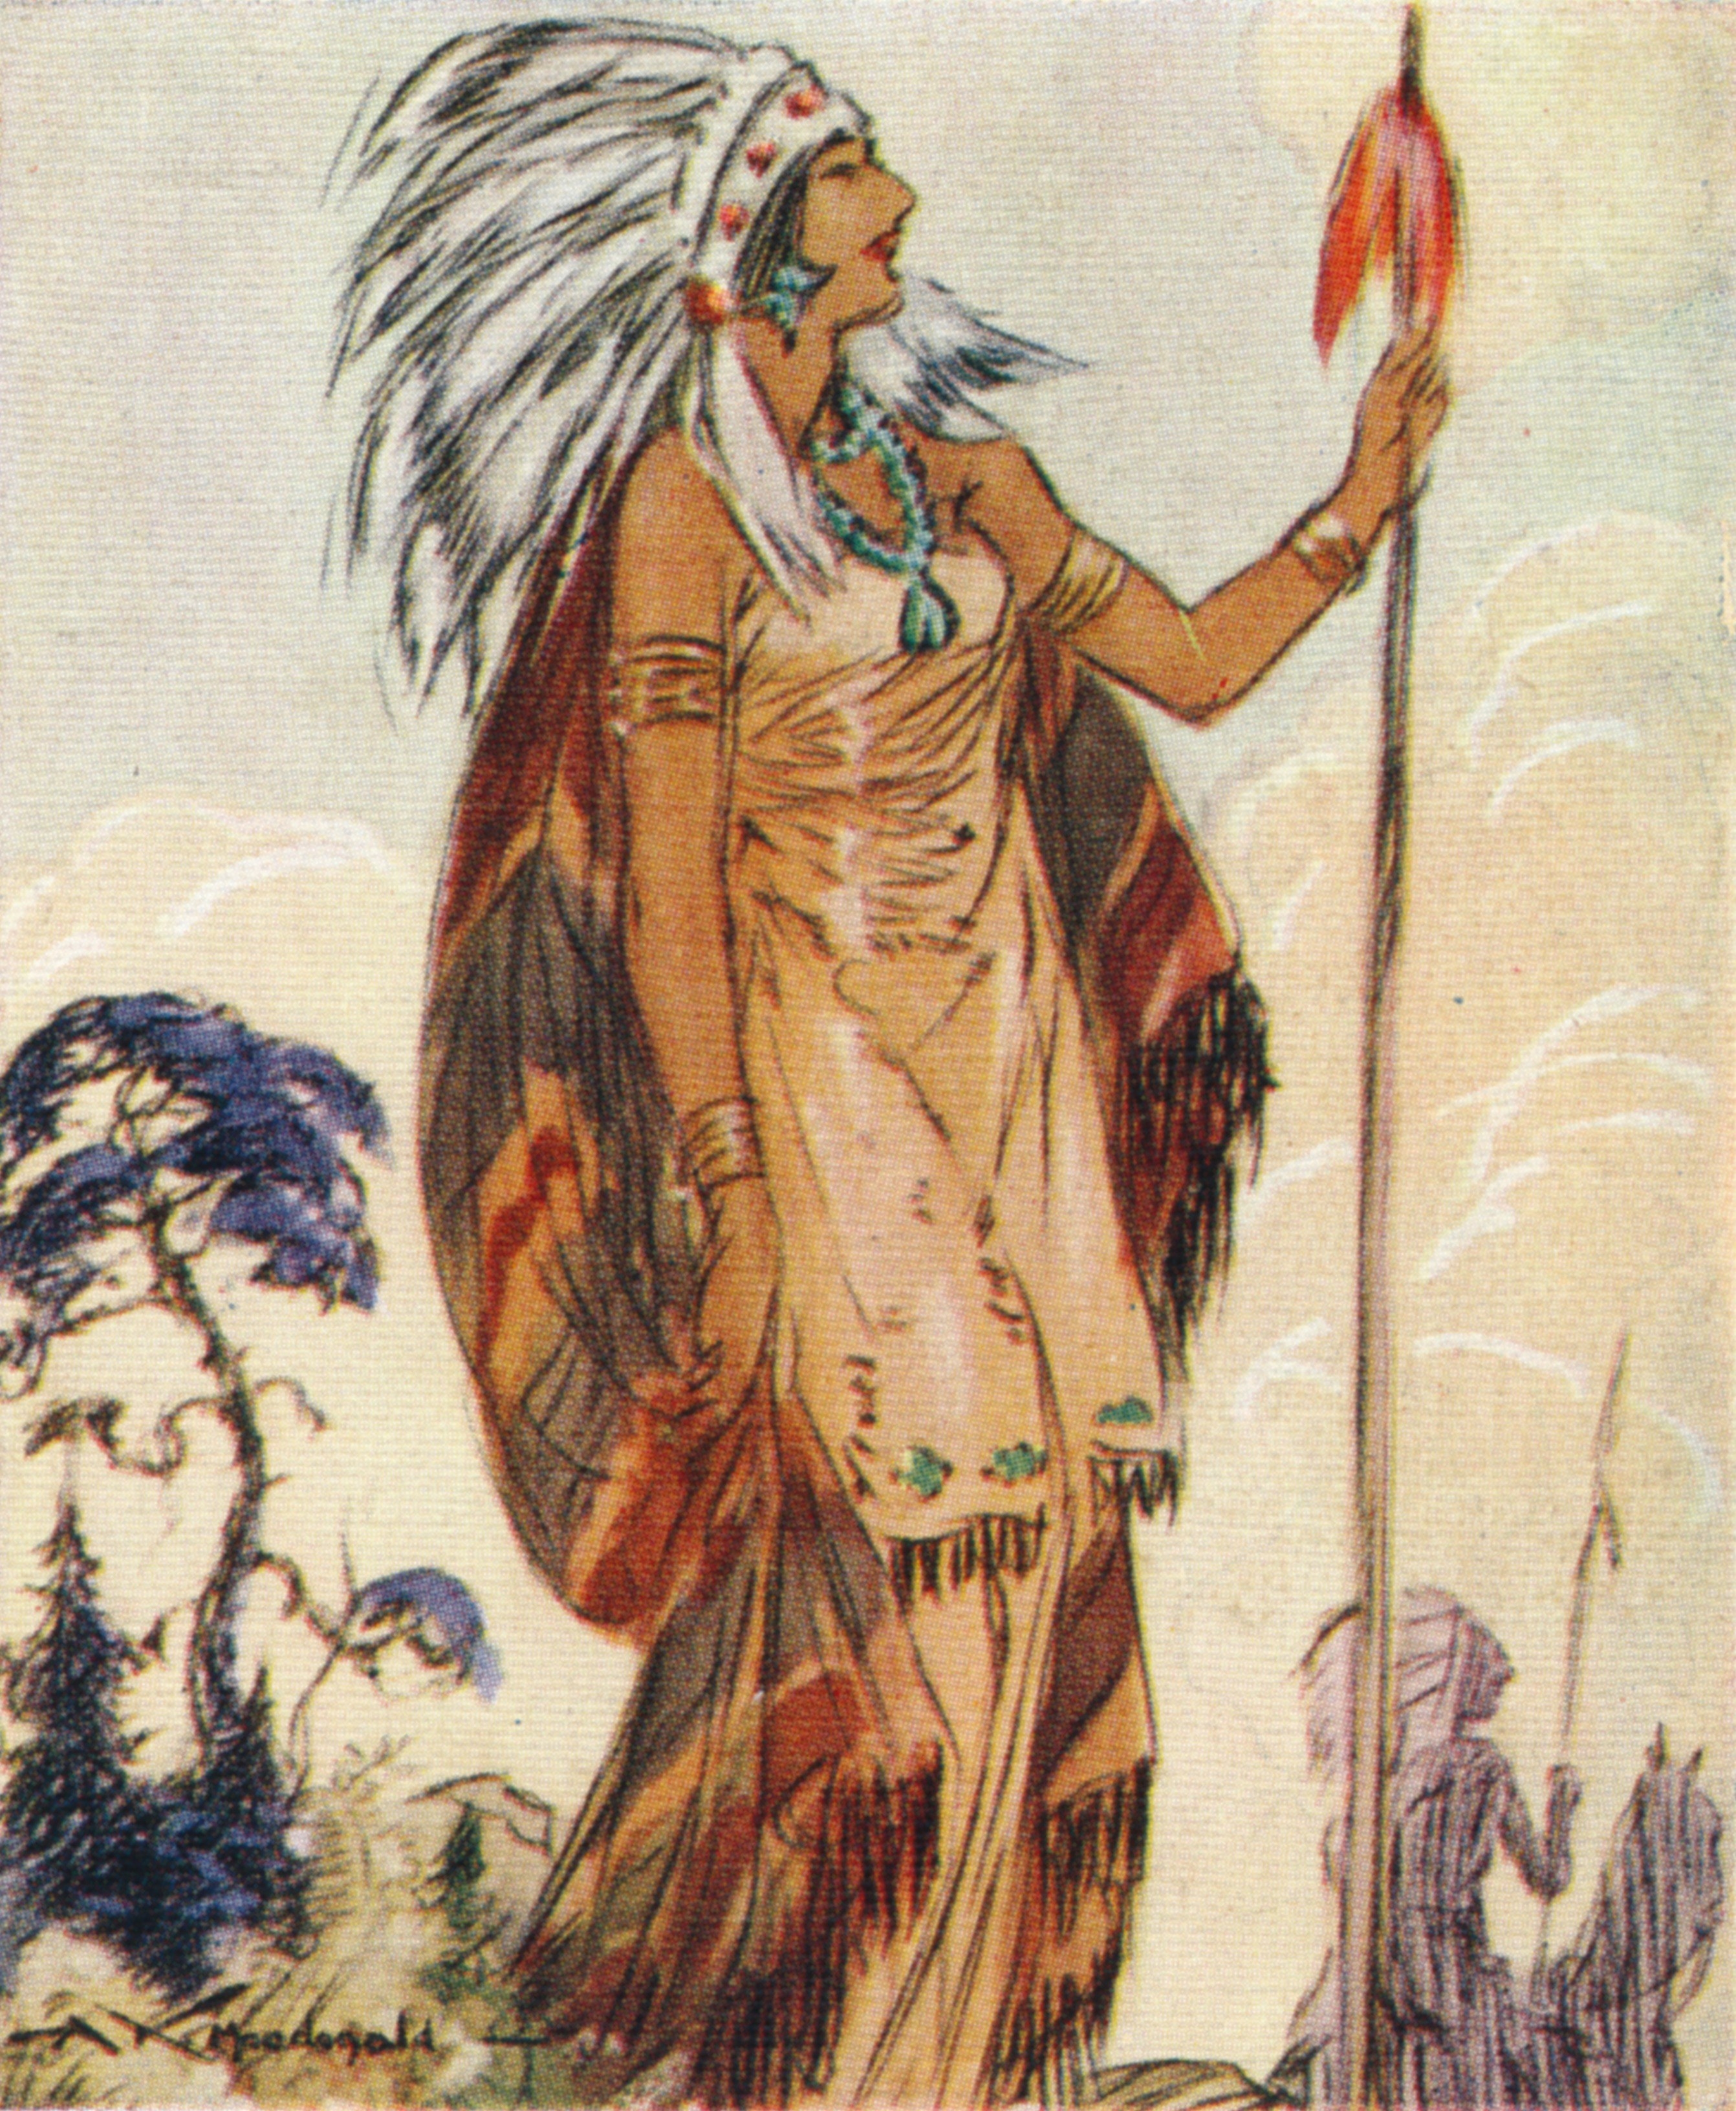 Portrait of Pocahontas, who saved John Smith, leader of the Virginia colonists, from being executed by her father, Powhatan